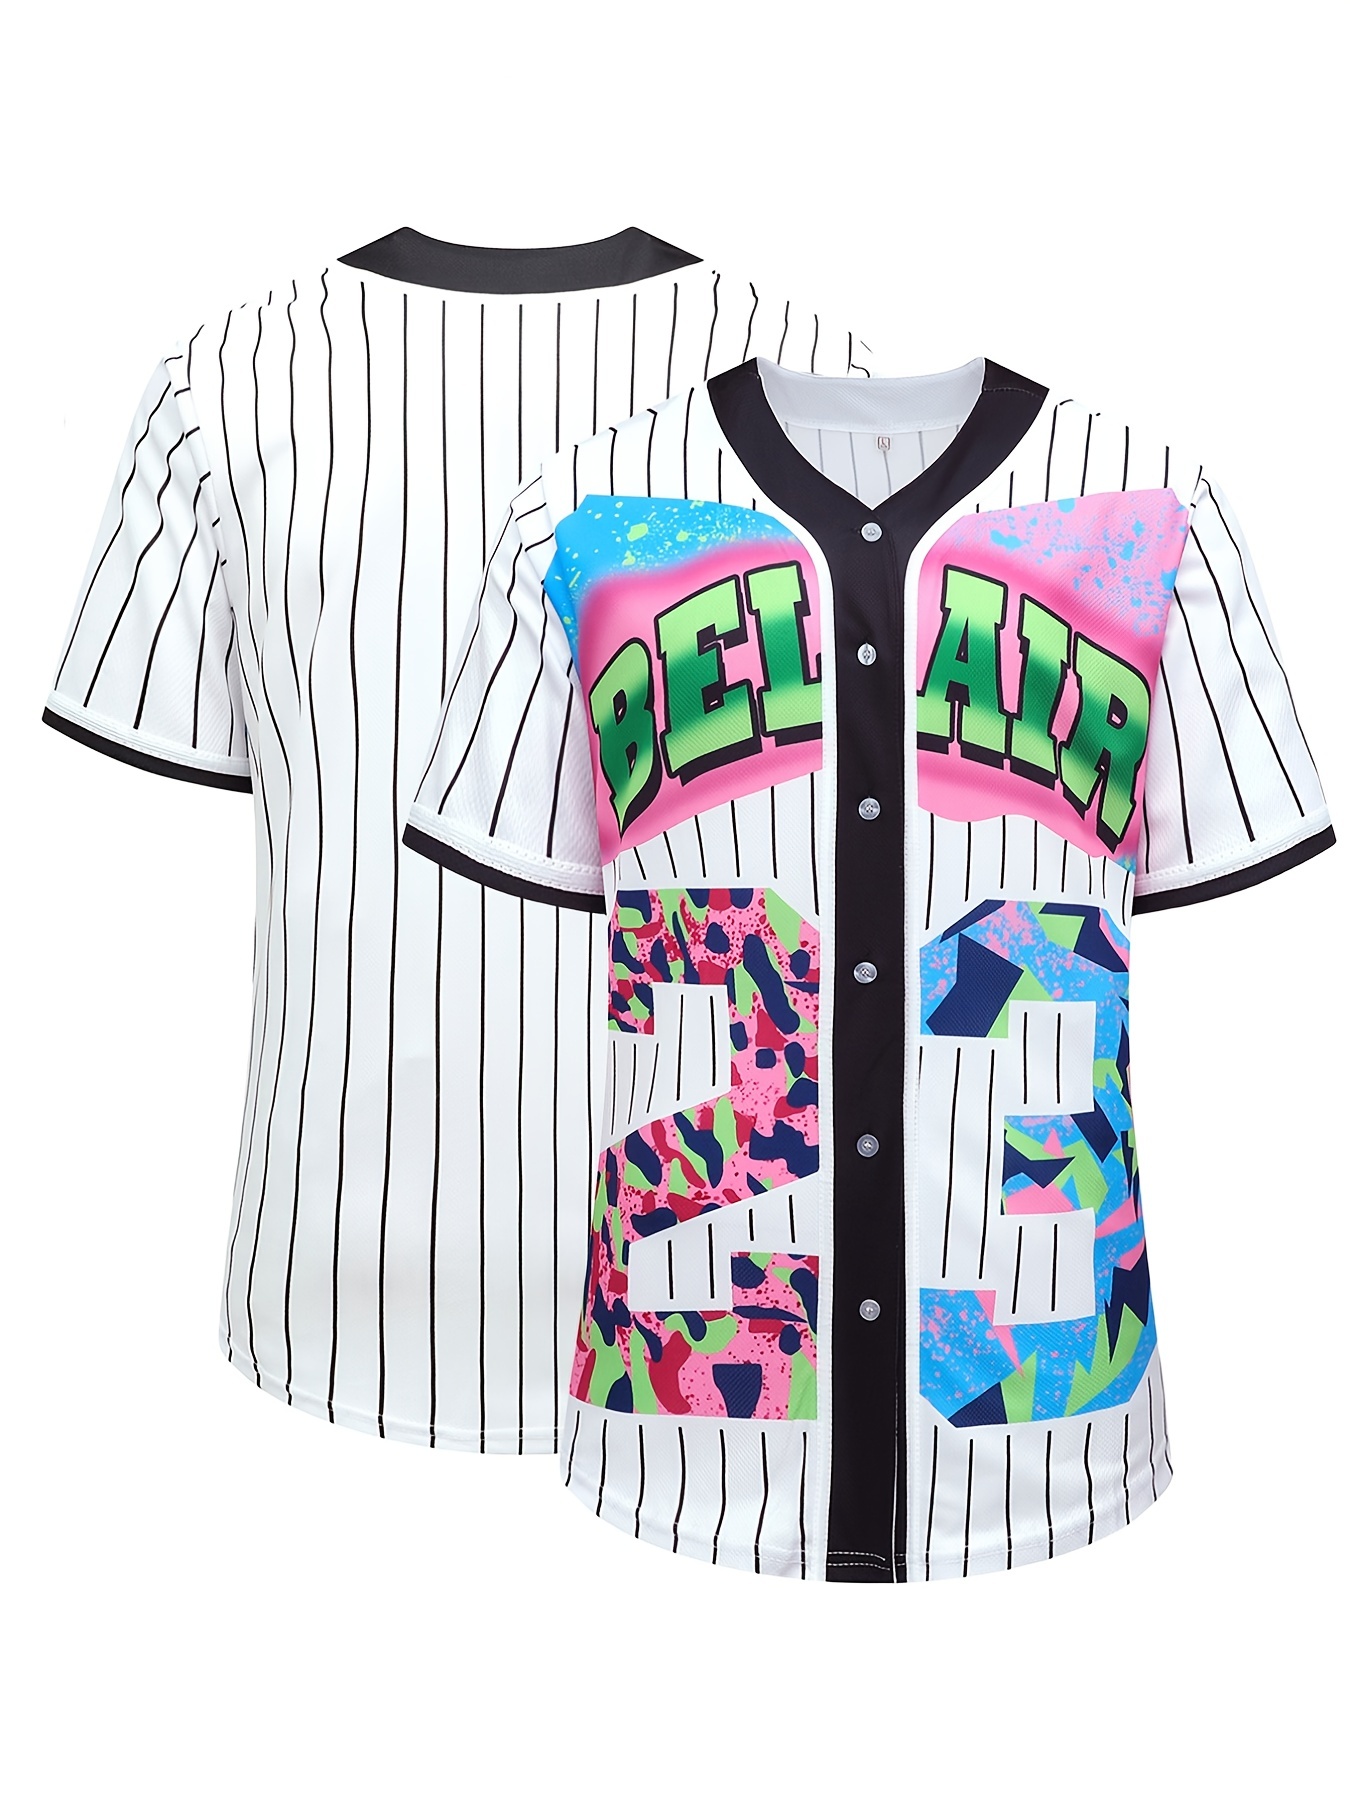 Baseball Jersey Classic New York 23 Stripes Design Printed for 80s 90s  Theme Birthday Party 